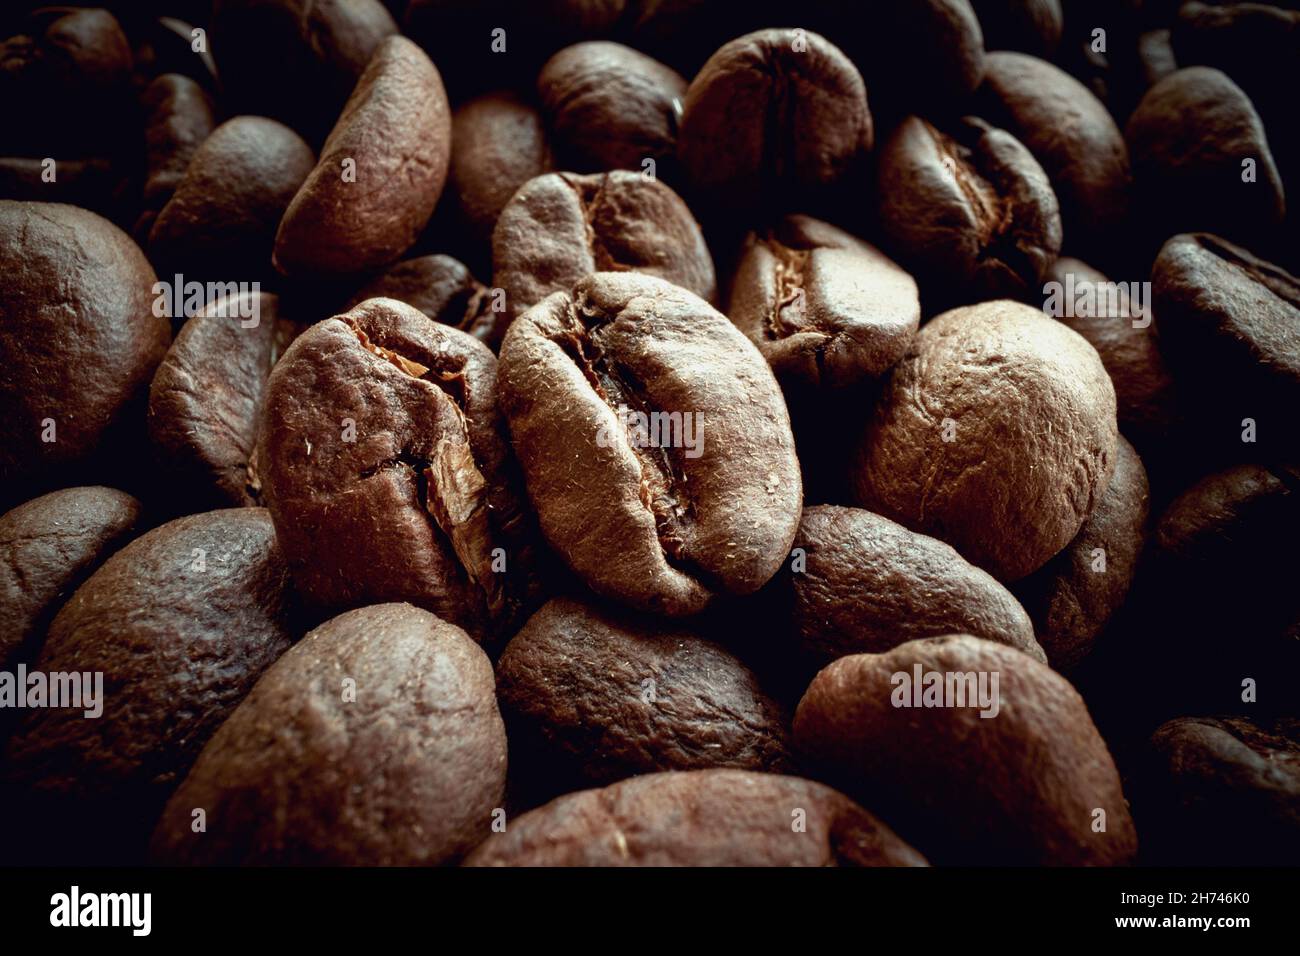 Zoomed in a bunch of fragrant and aromatic roasted coffee beans. Coffee, beverage, producing Stock Photo